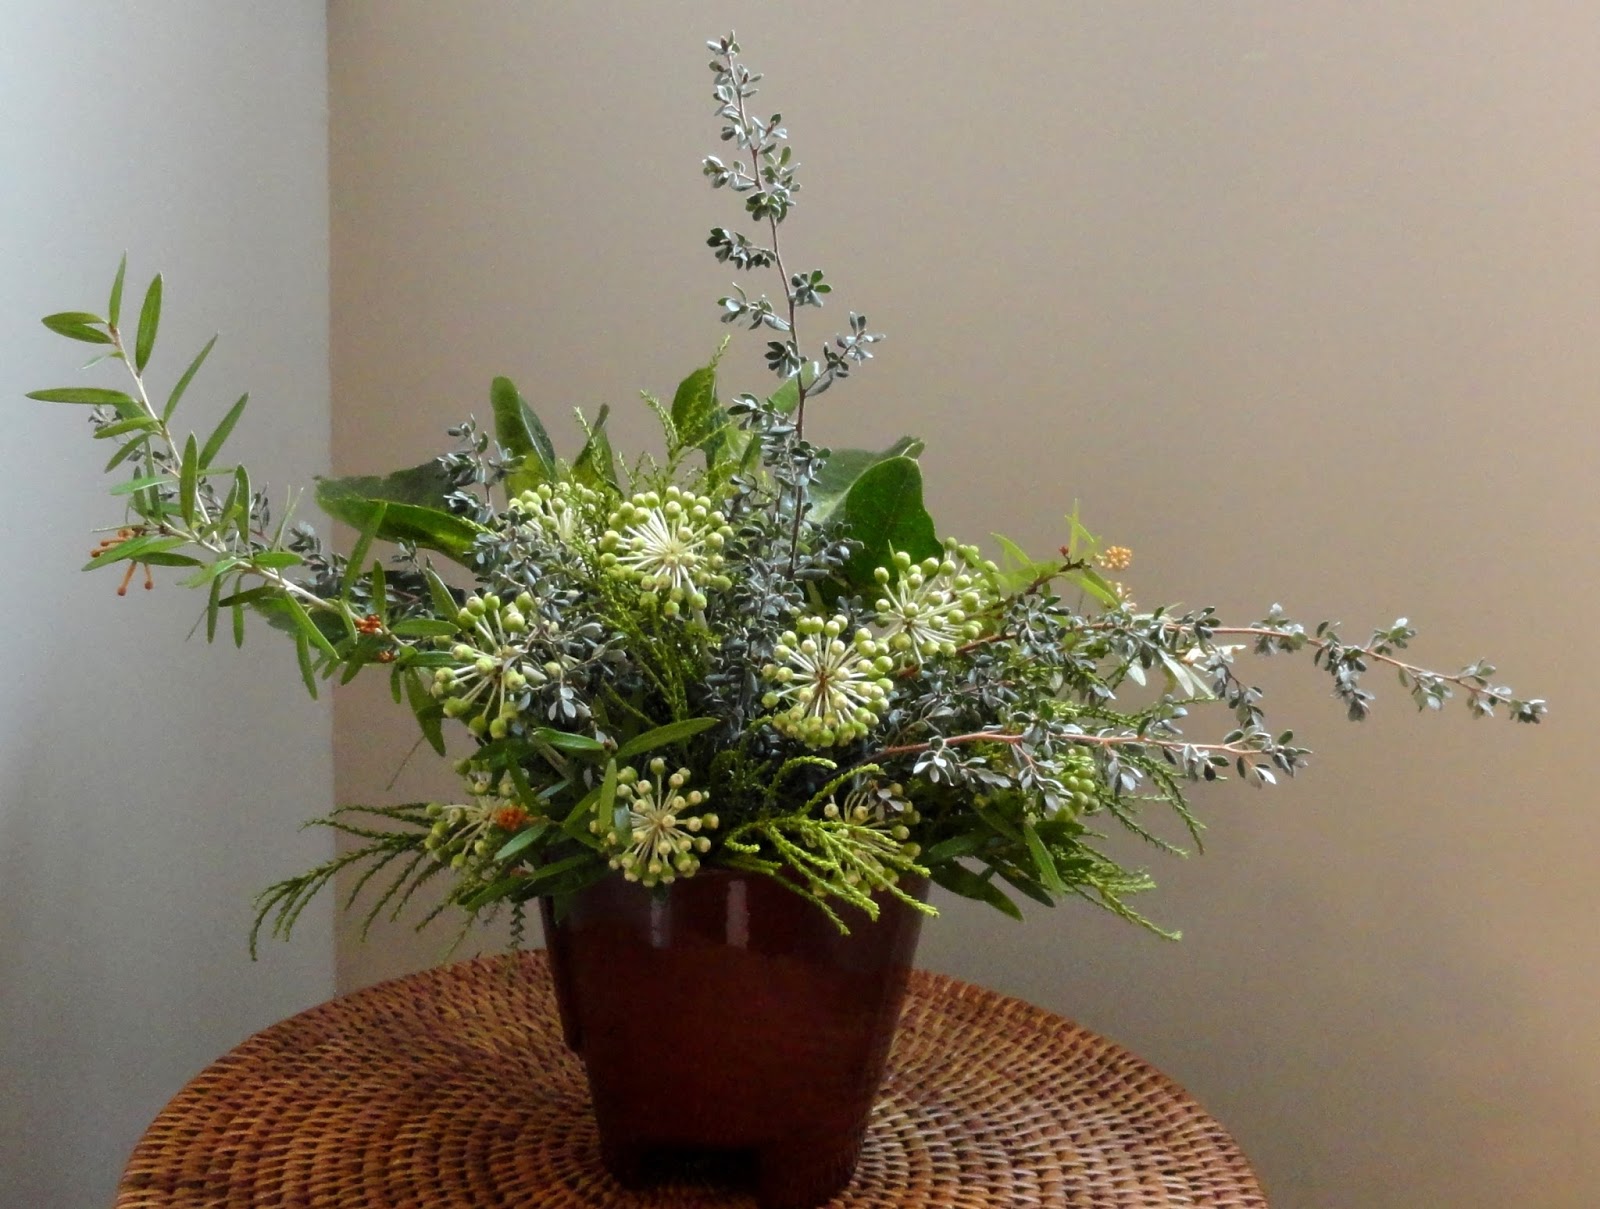 Image of Fatsia japonica flowers in a vase